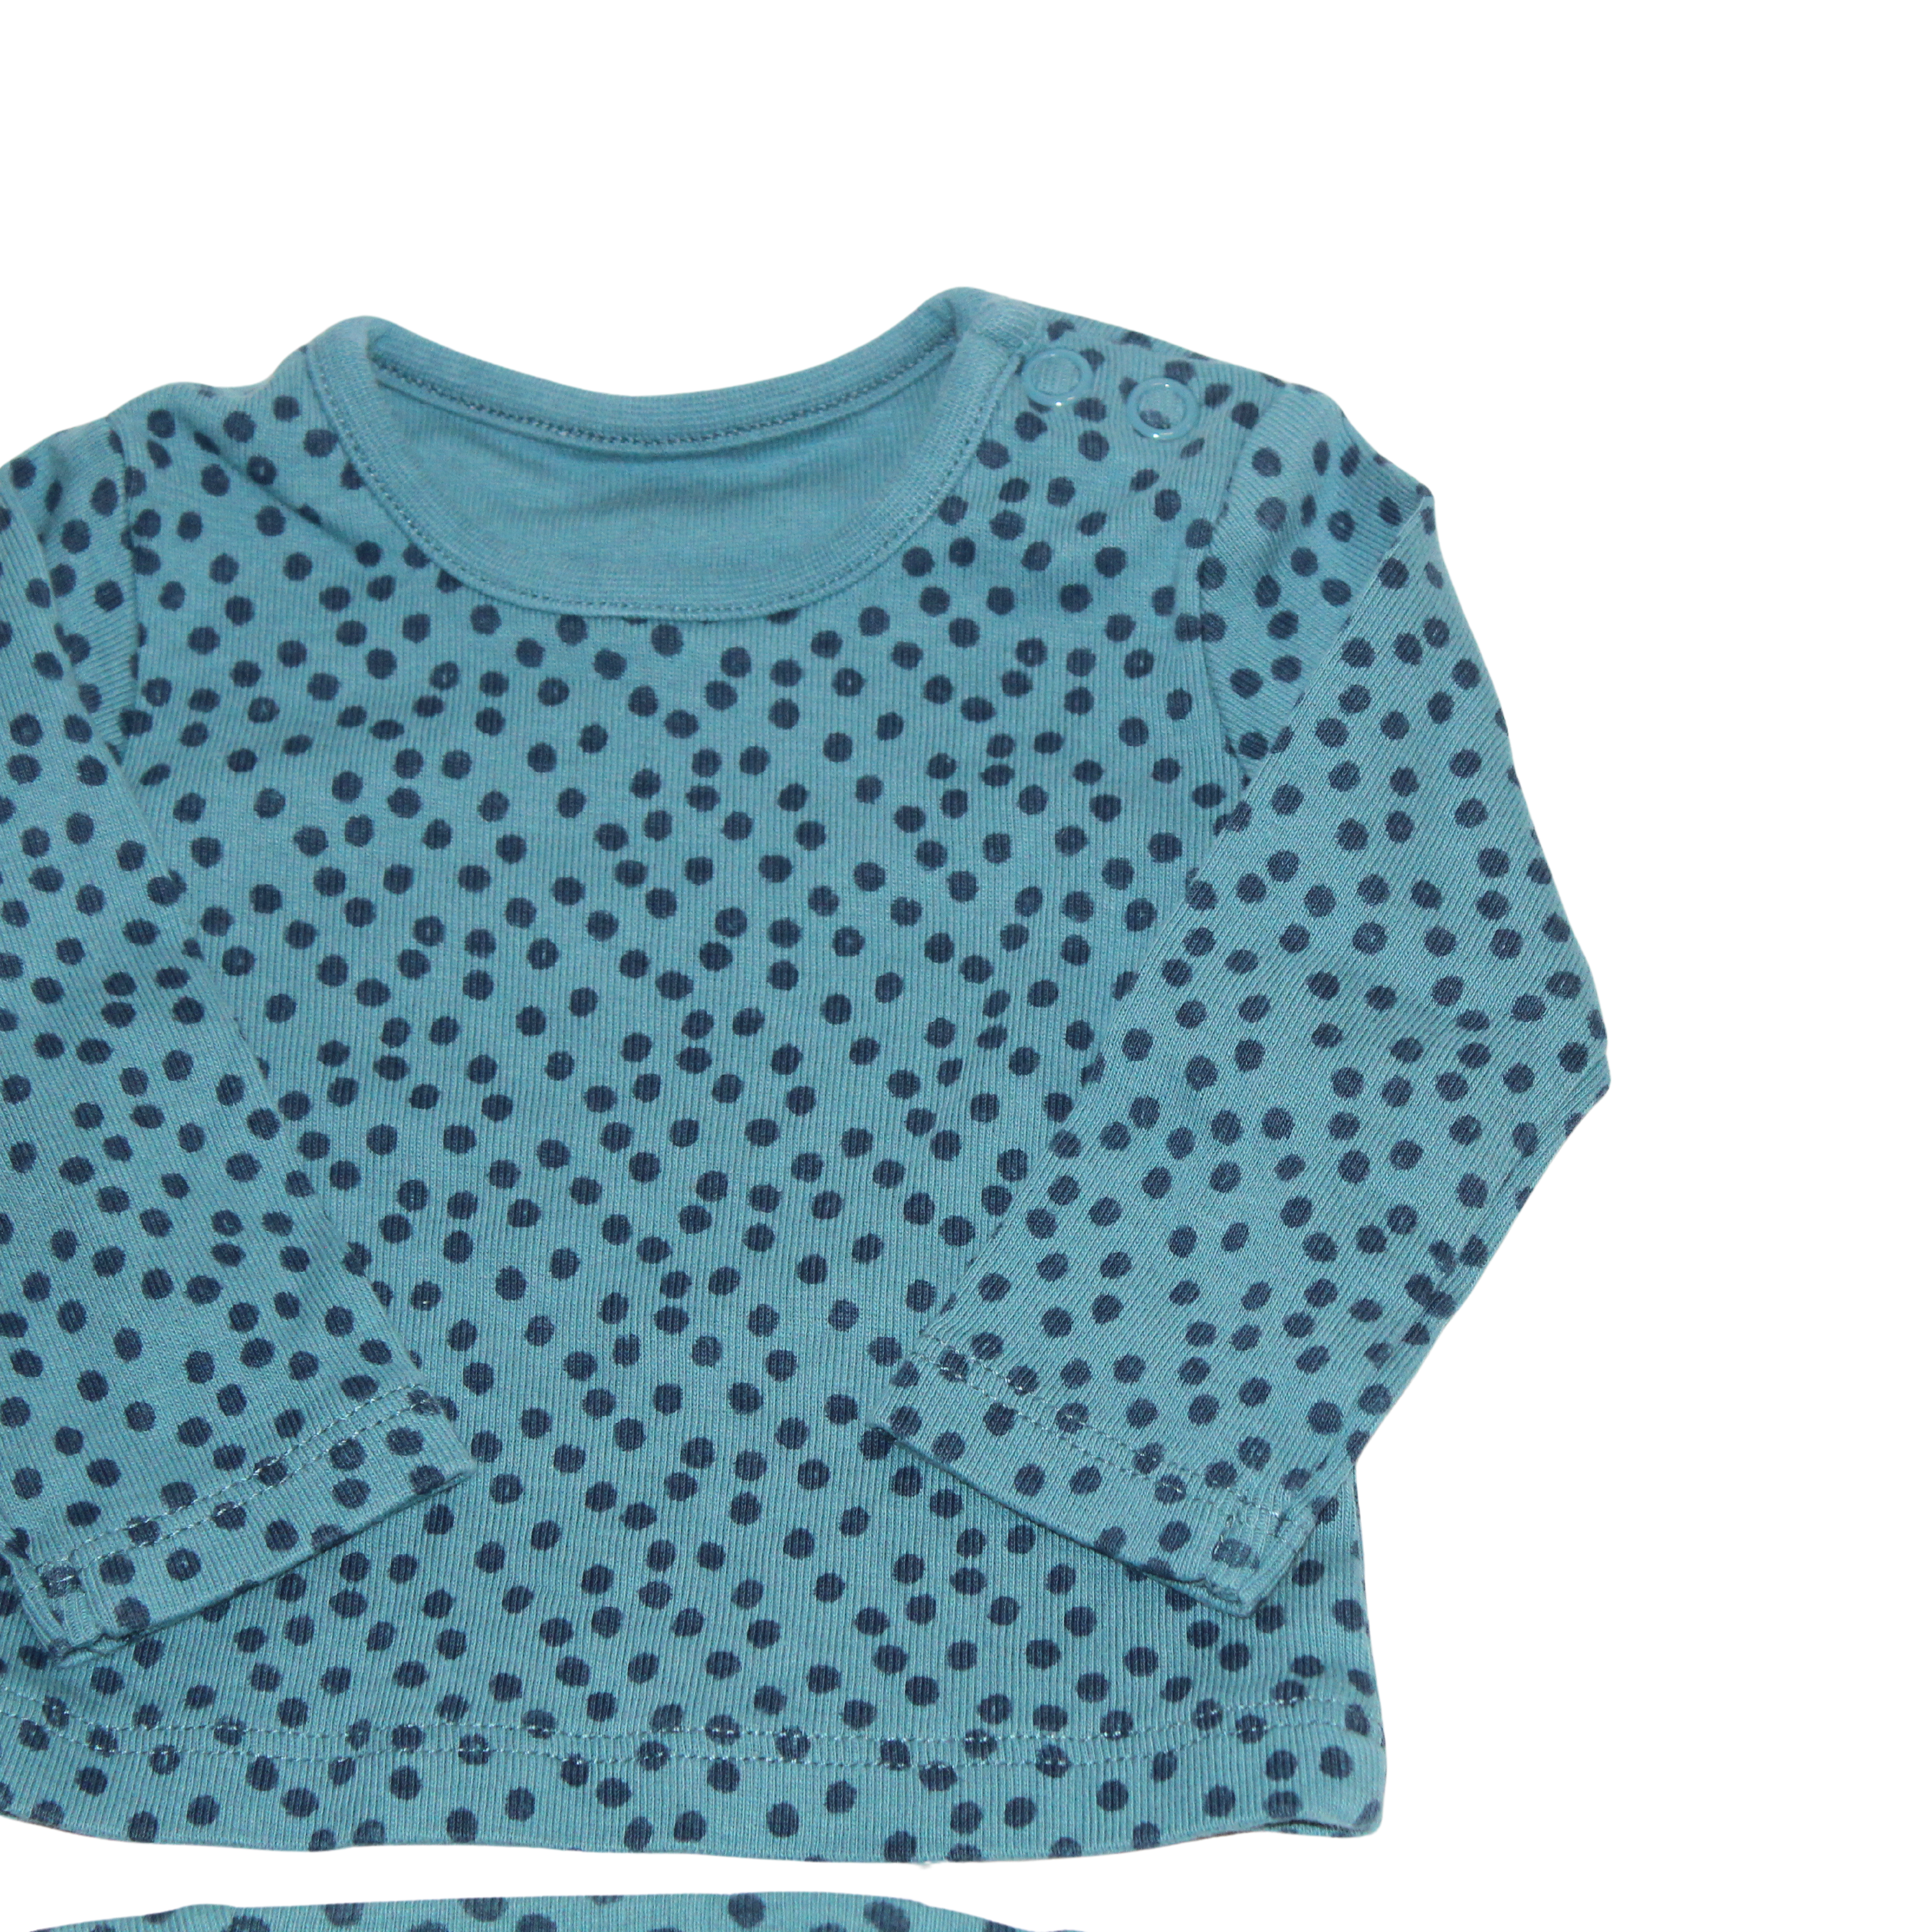 Spotty Teal Outfit